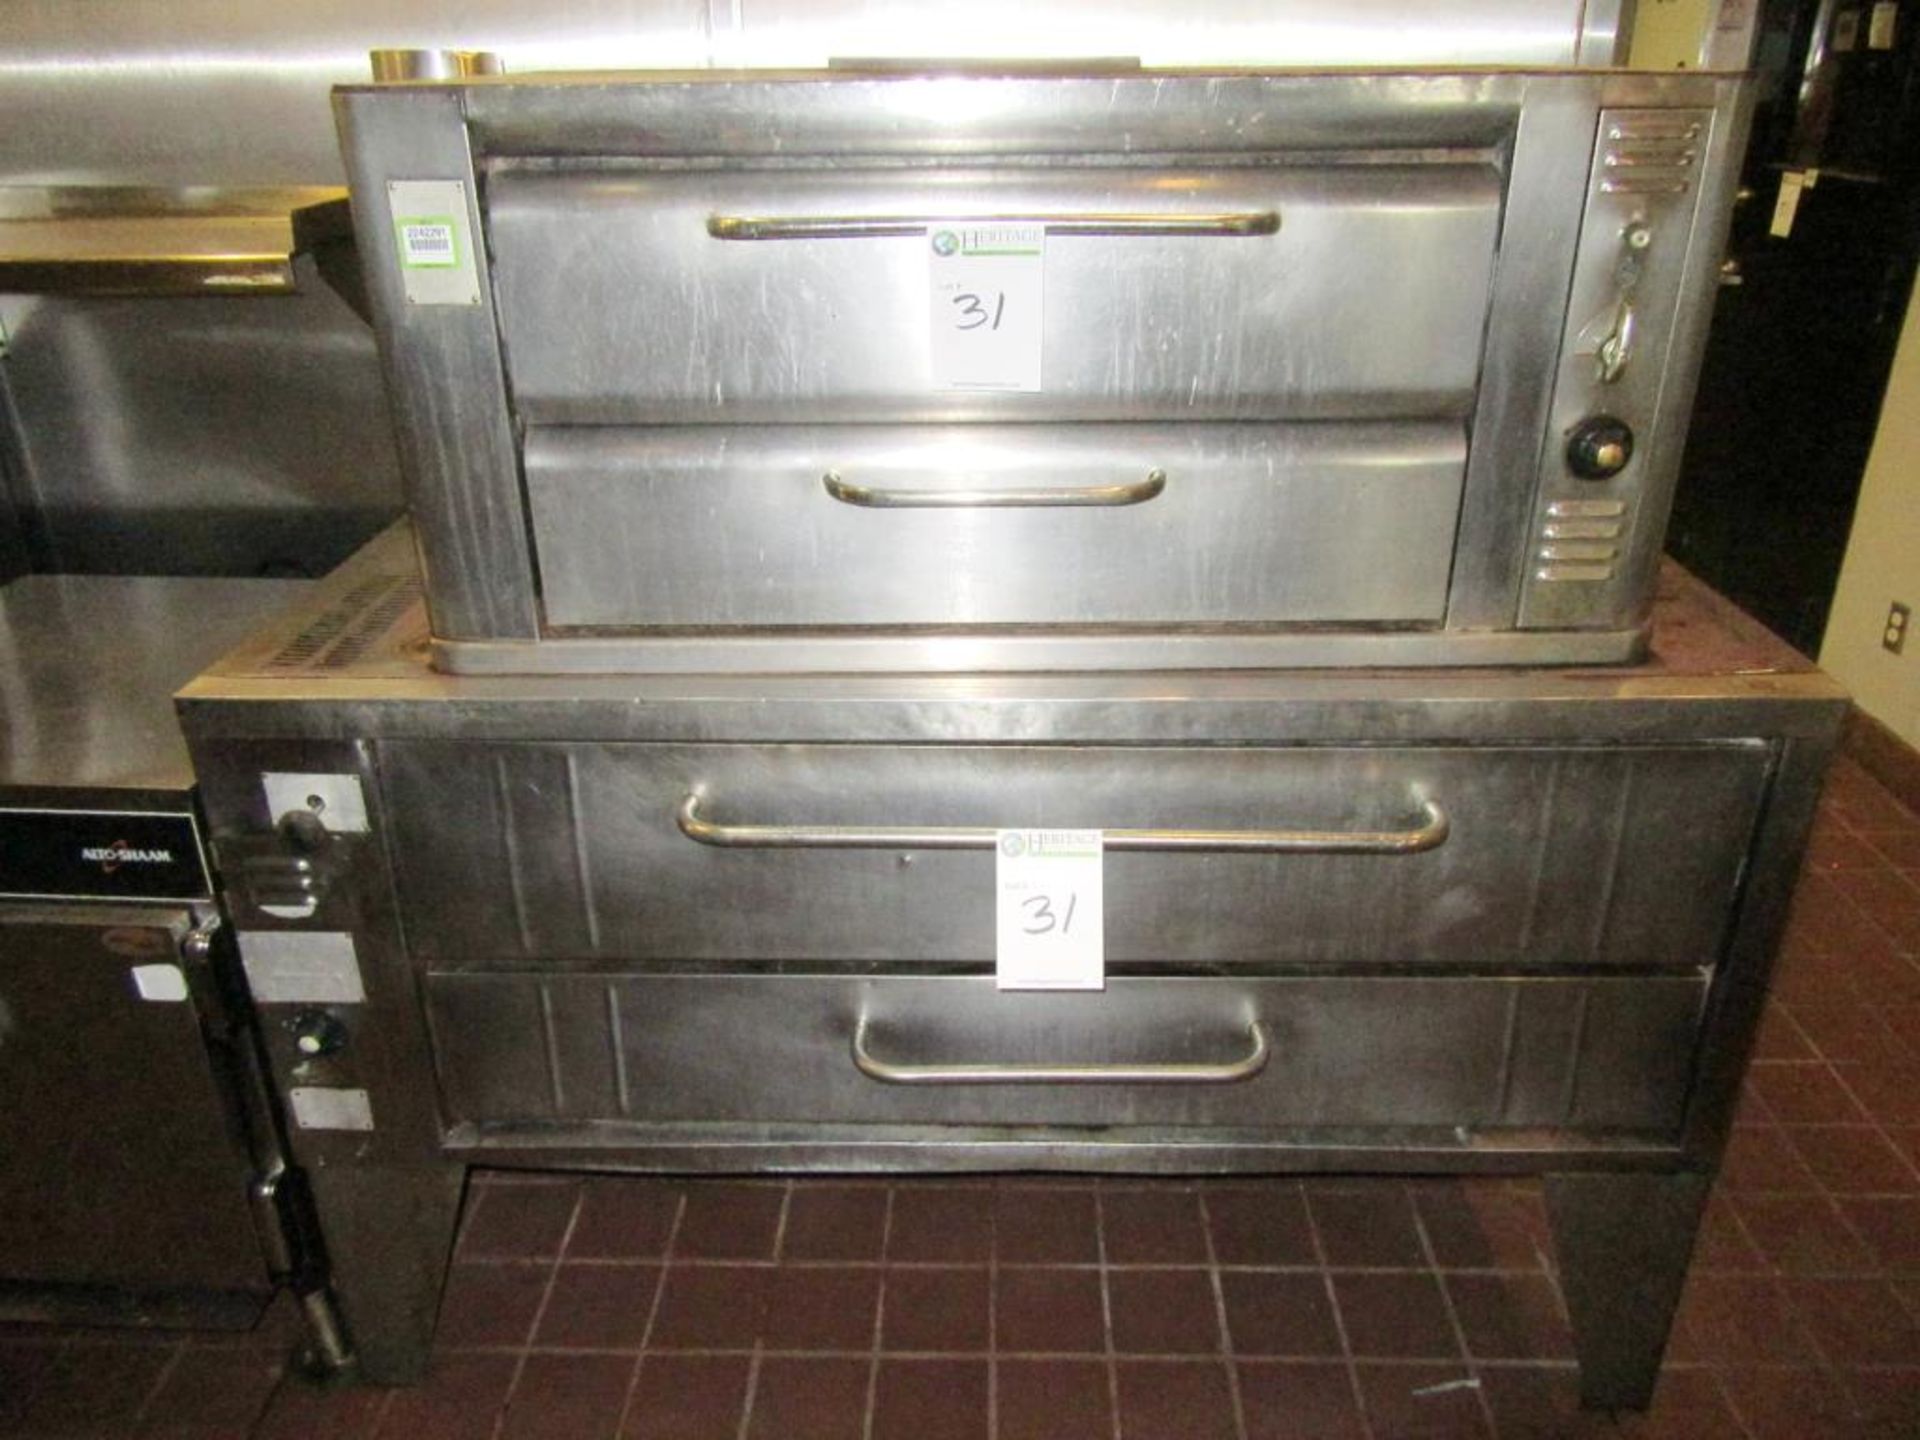 Gas Ovens